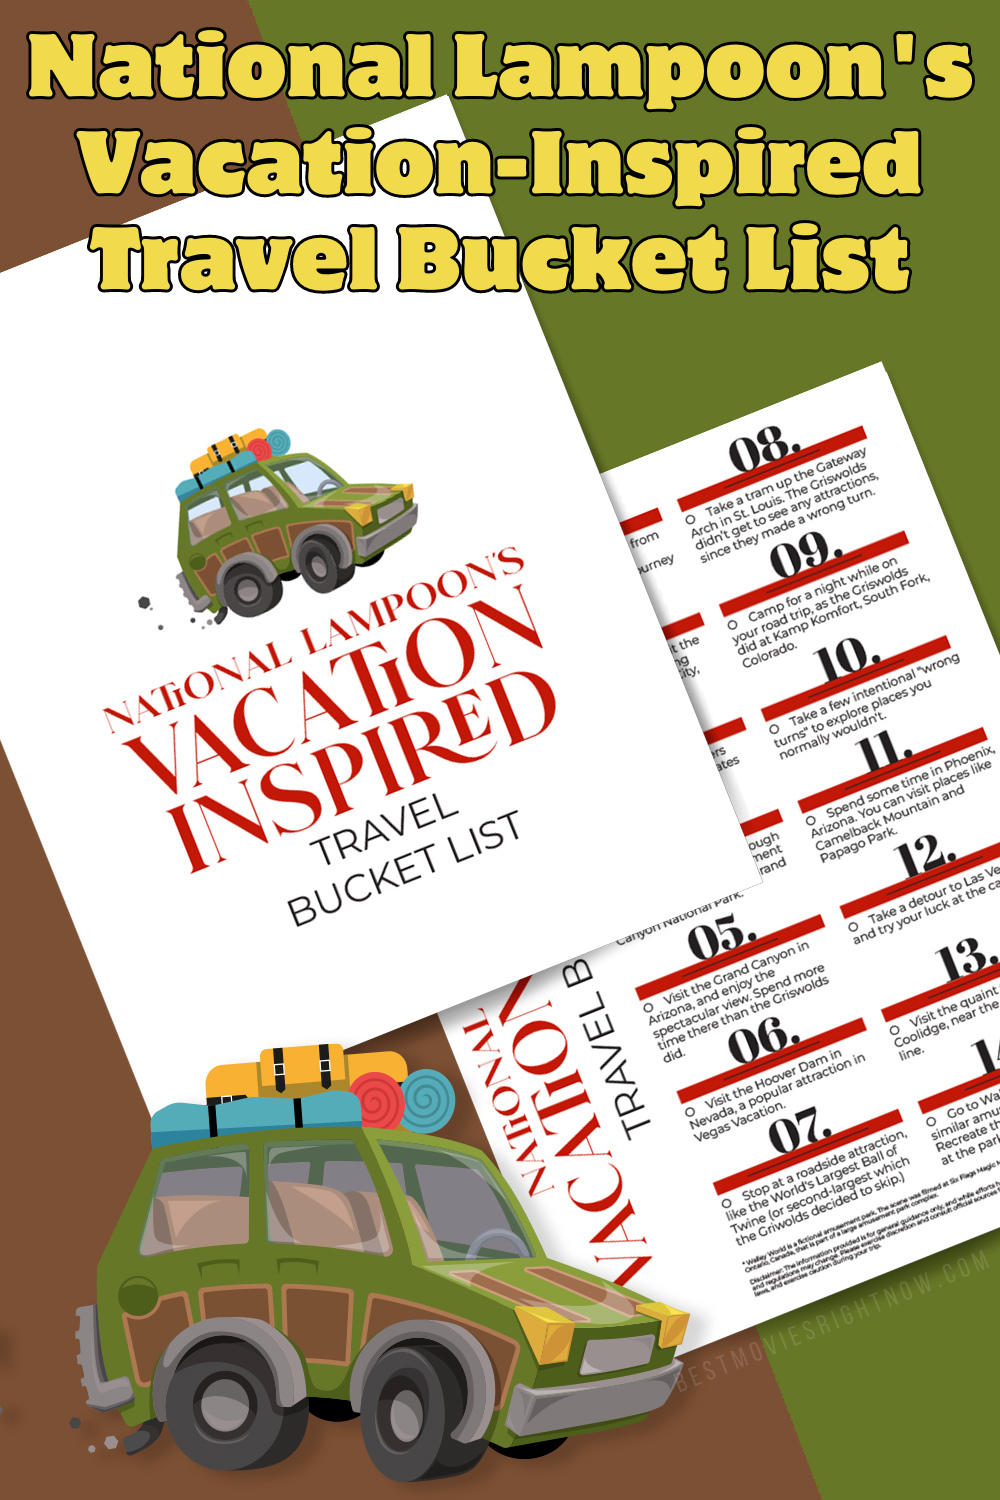 National Lampoon's Vacation-Inspired Travel Bucket List pin image